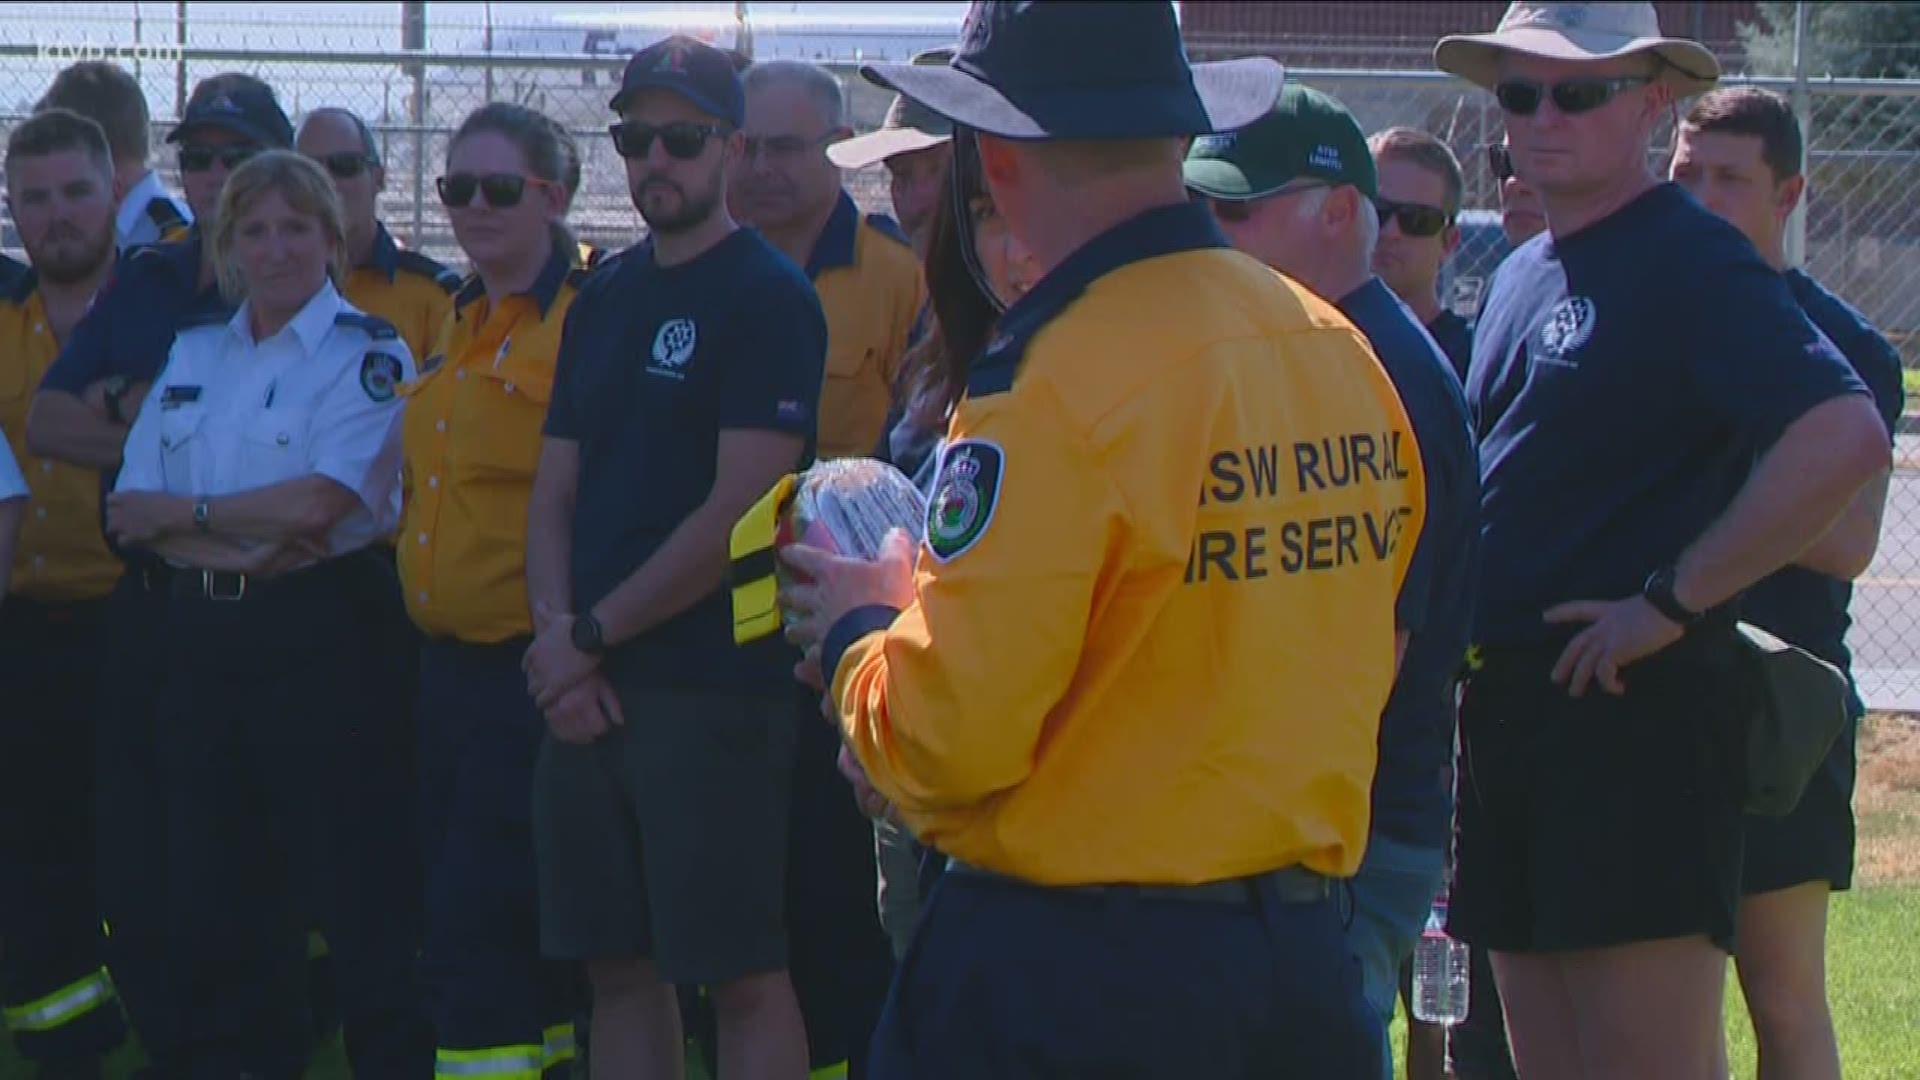 About 140 firefighters from Australia and New Zealand arrived in Boise on Sunday, and spent the day training to assist fire crews working across the Northwest and Northern California.